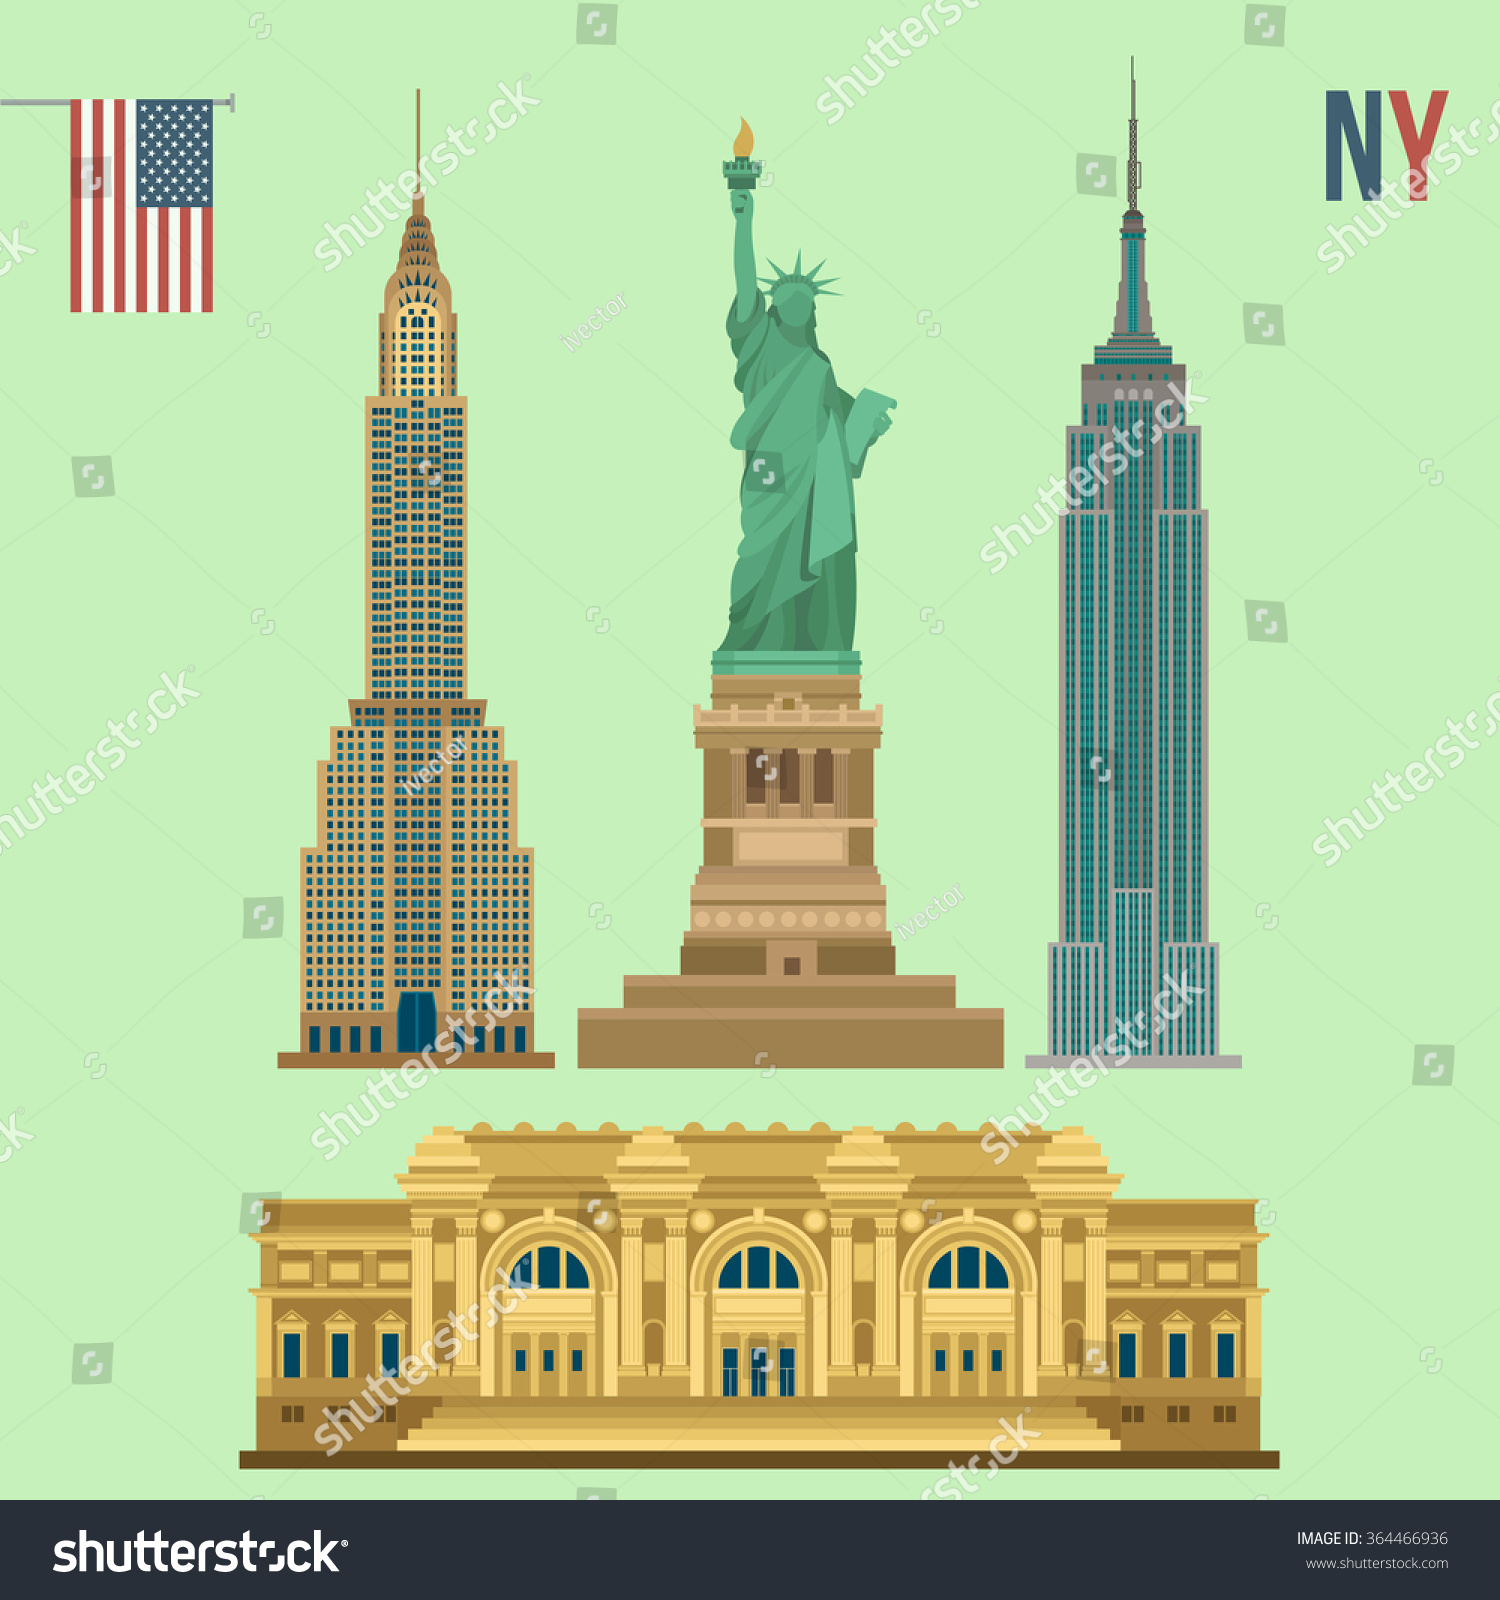 SVG of Set of New York Famous Buildings: Statue of Liberty, Metropolitan Museum of Art, Empire State Building, Chrysler. Vector illustration svg